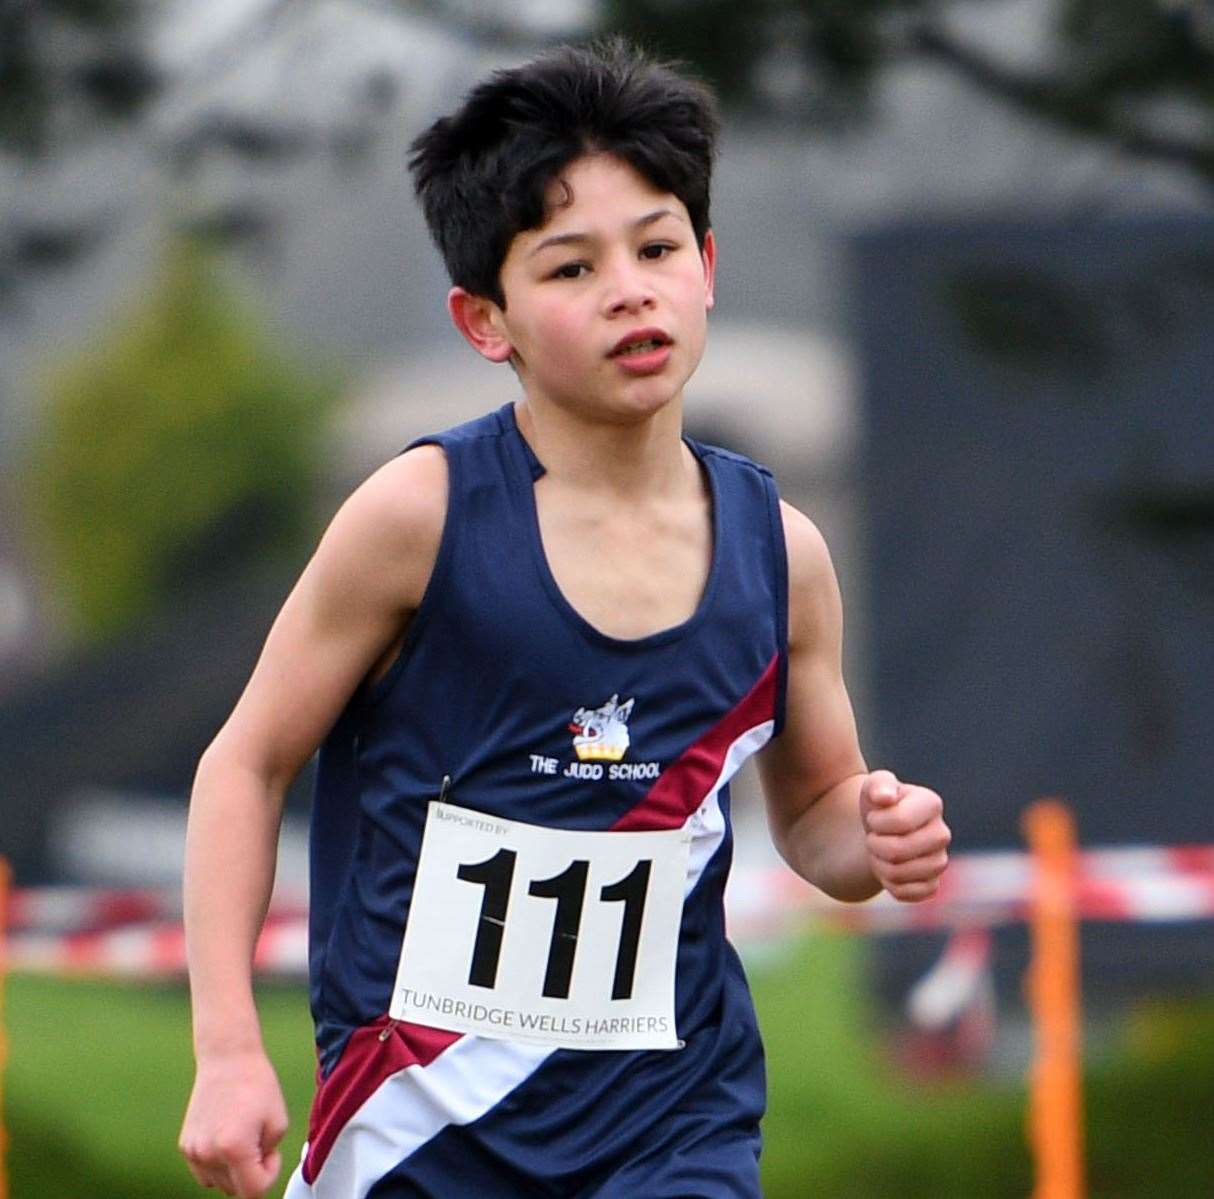 Tonbridge's Charlie Warren made the top five in the Year 7 boys' race. Picture: Barry Goodwin (54437759)